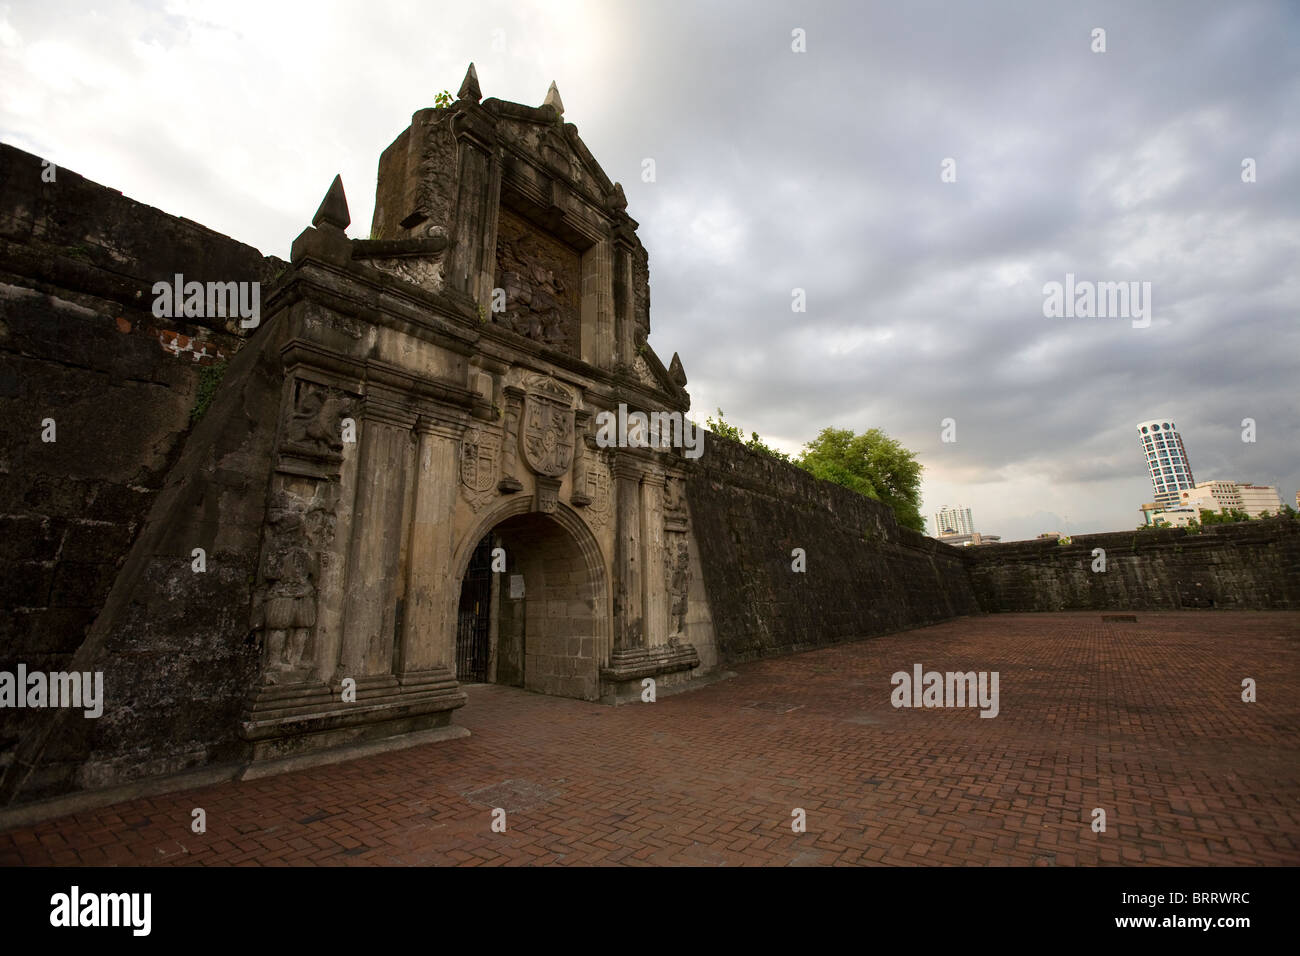 The main gate of Fort Santiago in the historic Intramuros section of Manila, Philippines. Stock Photo